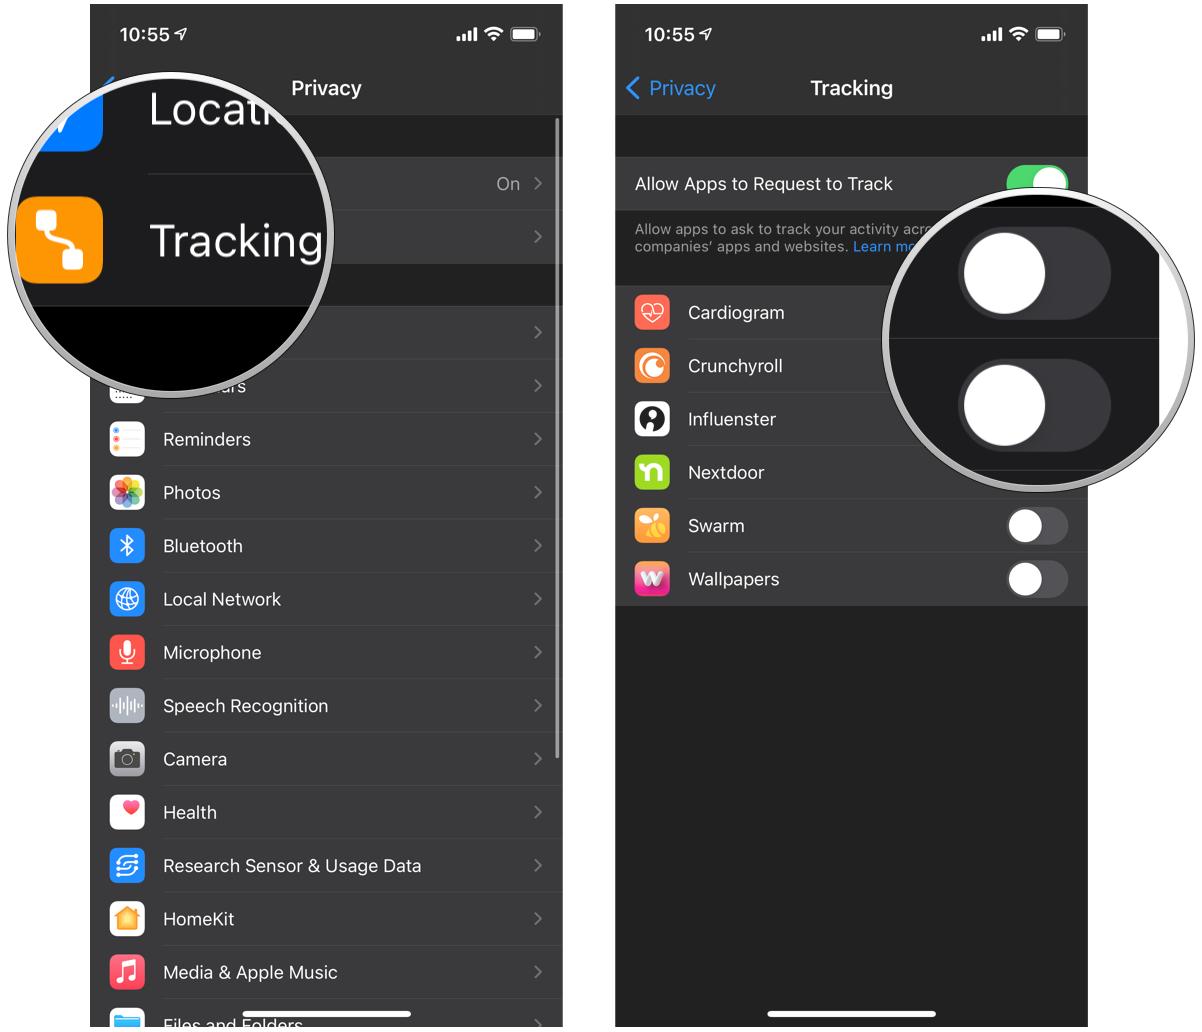 Allow an app to track if rejected previously on iPhone by showing: Tap Tracking, tap toggles on apps that you want to allow tracking or not